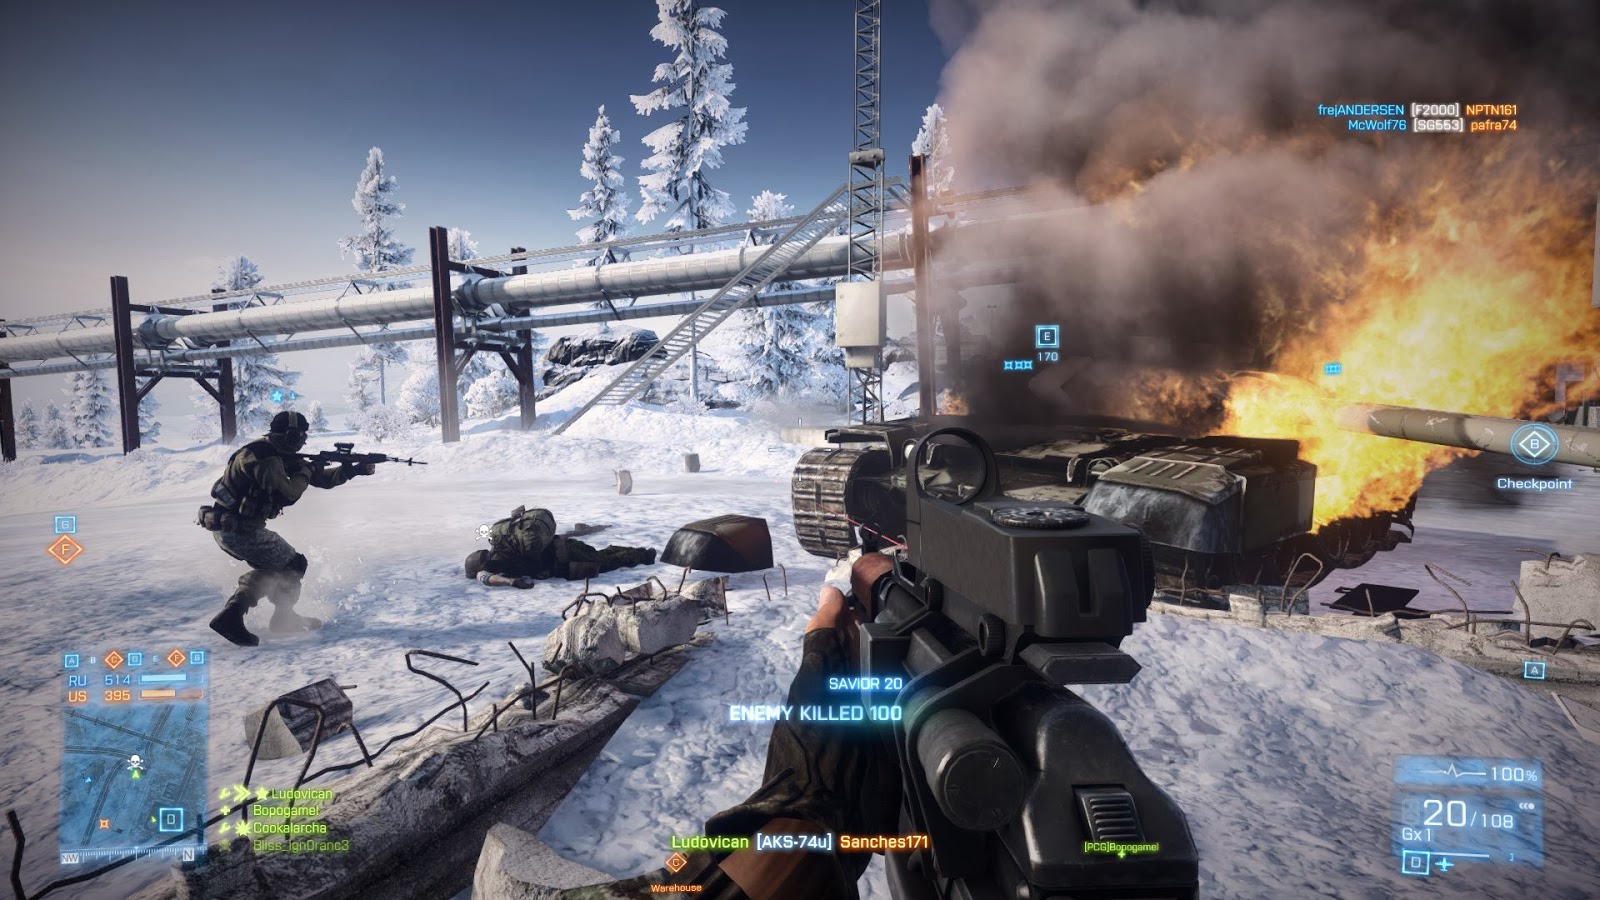 Battlefield 4 Free Download PC Game Full Version